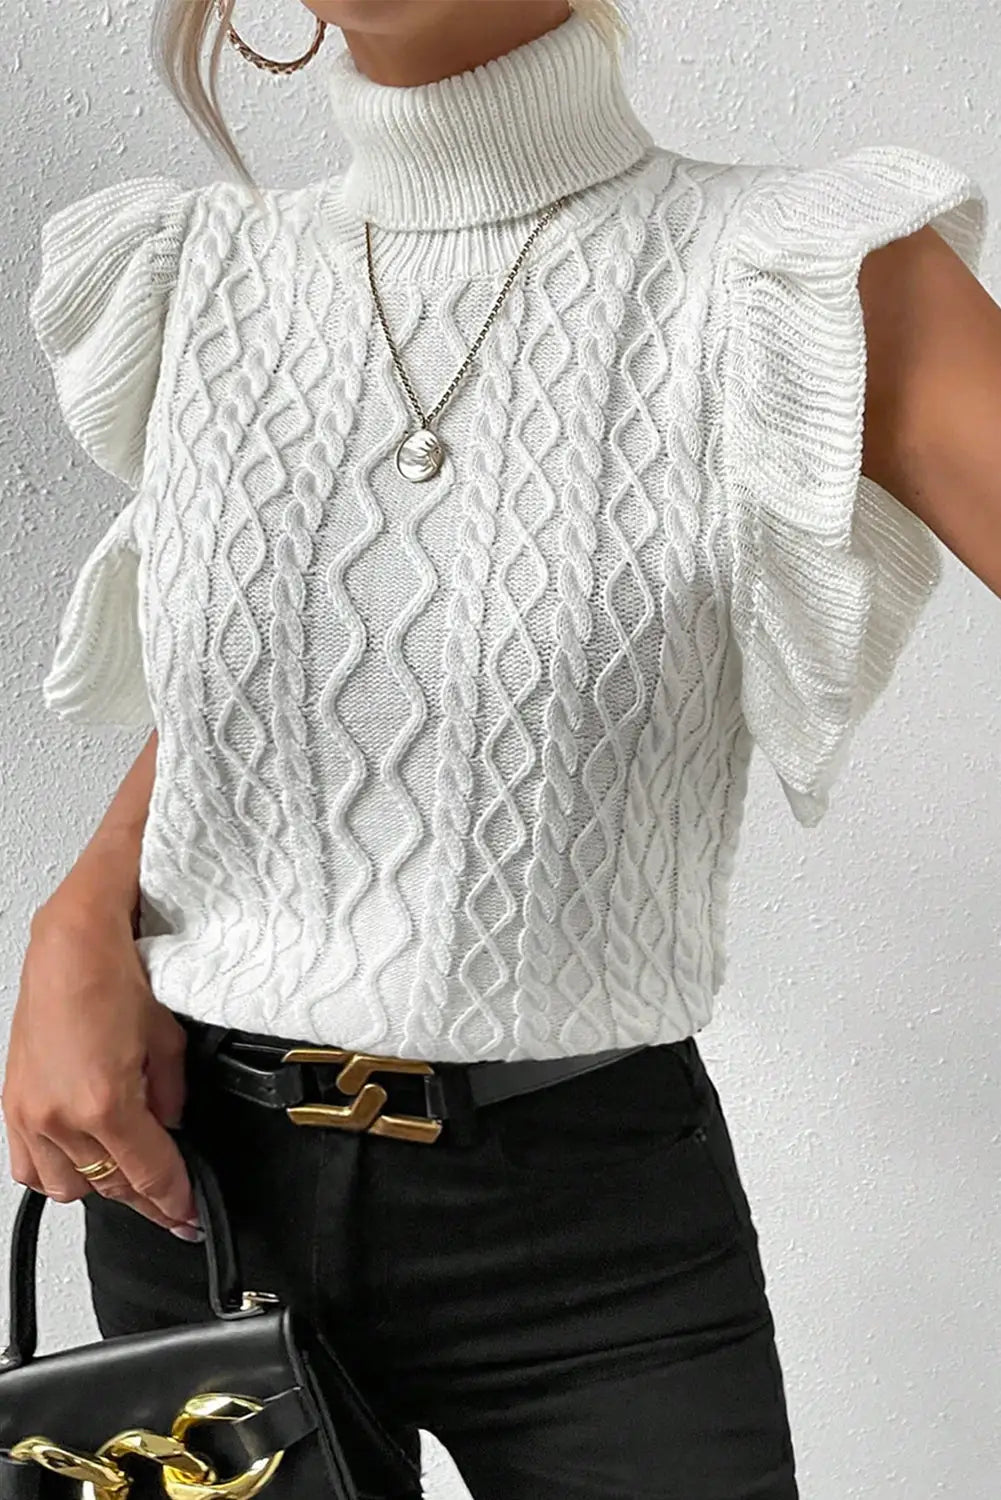 White turtle neck short sleeve cable knit ruffled sweater - sweaters & cardigans